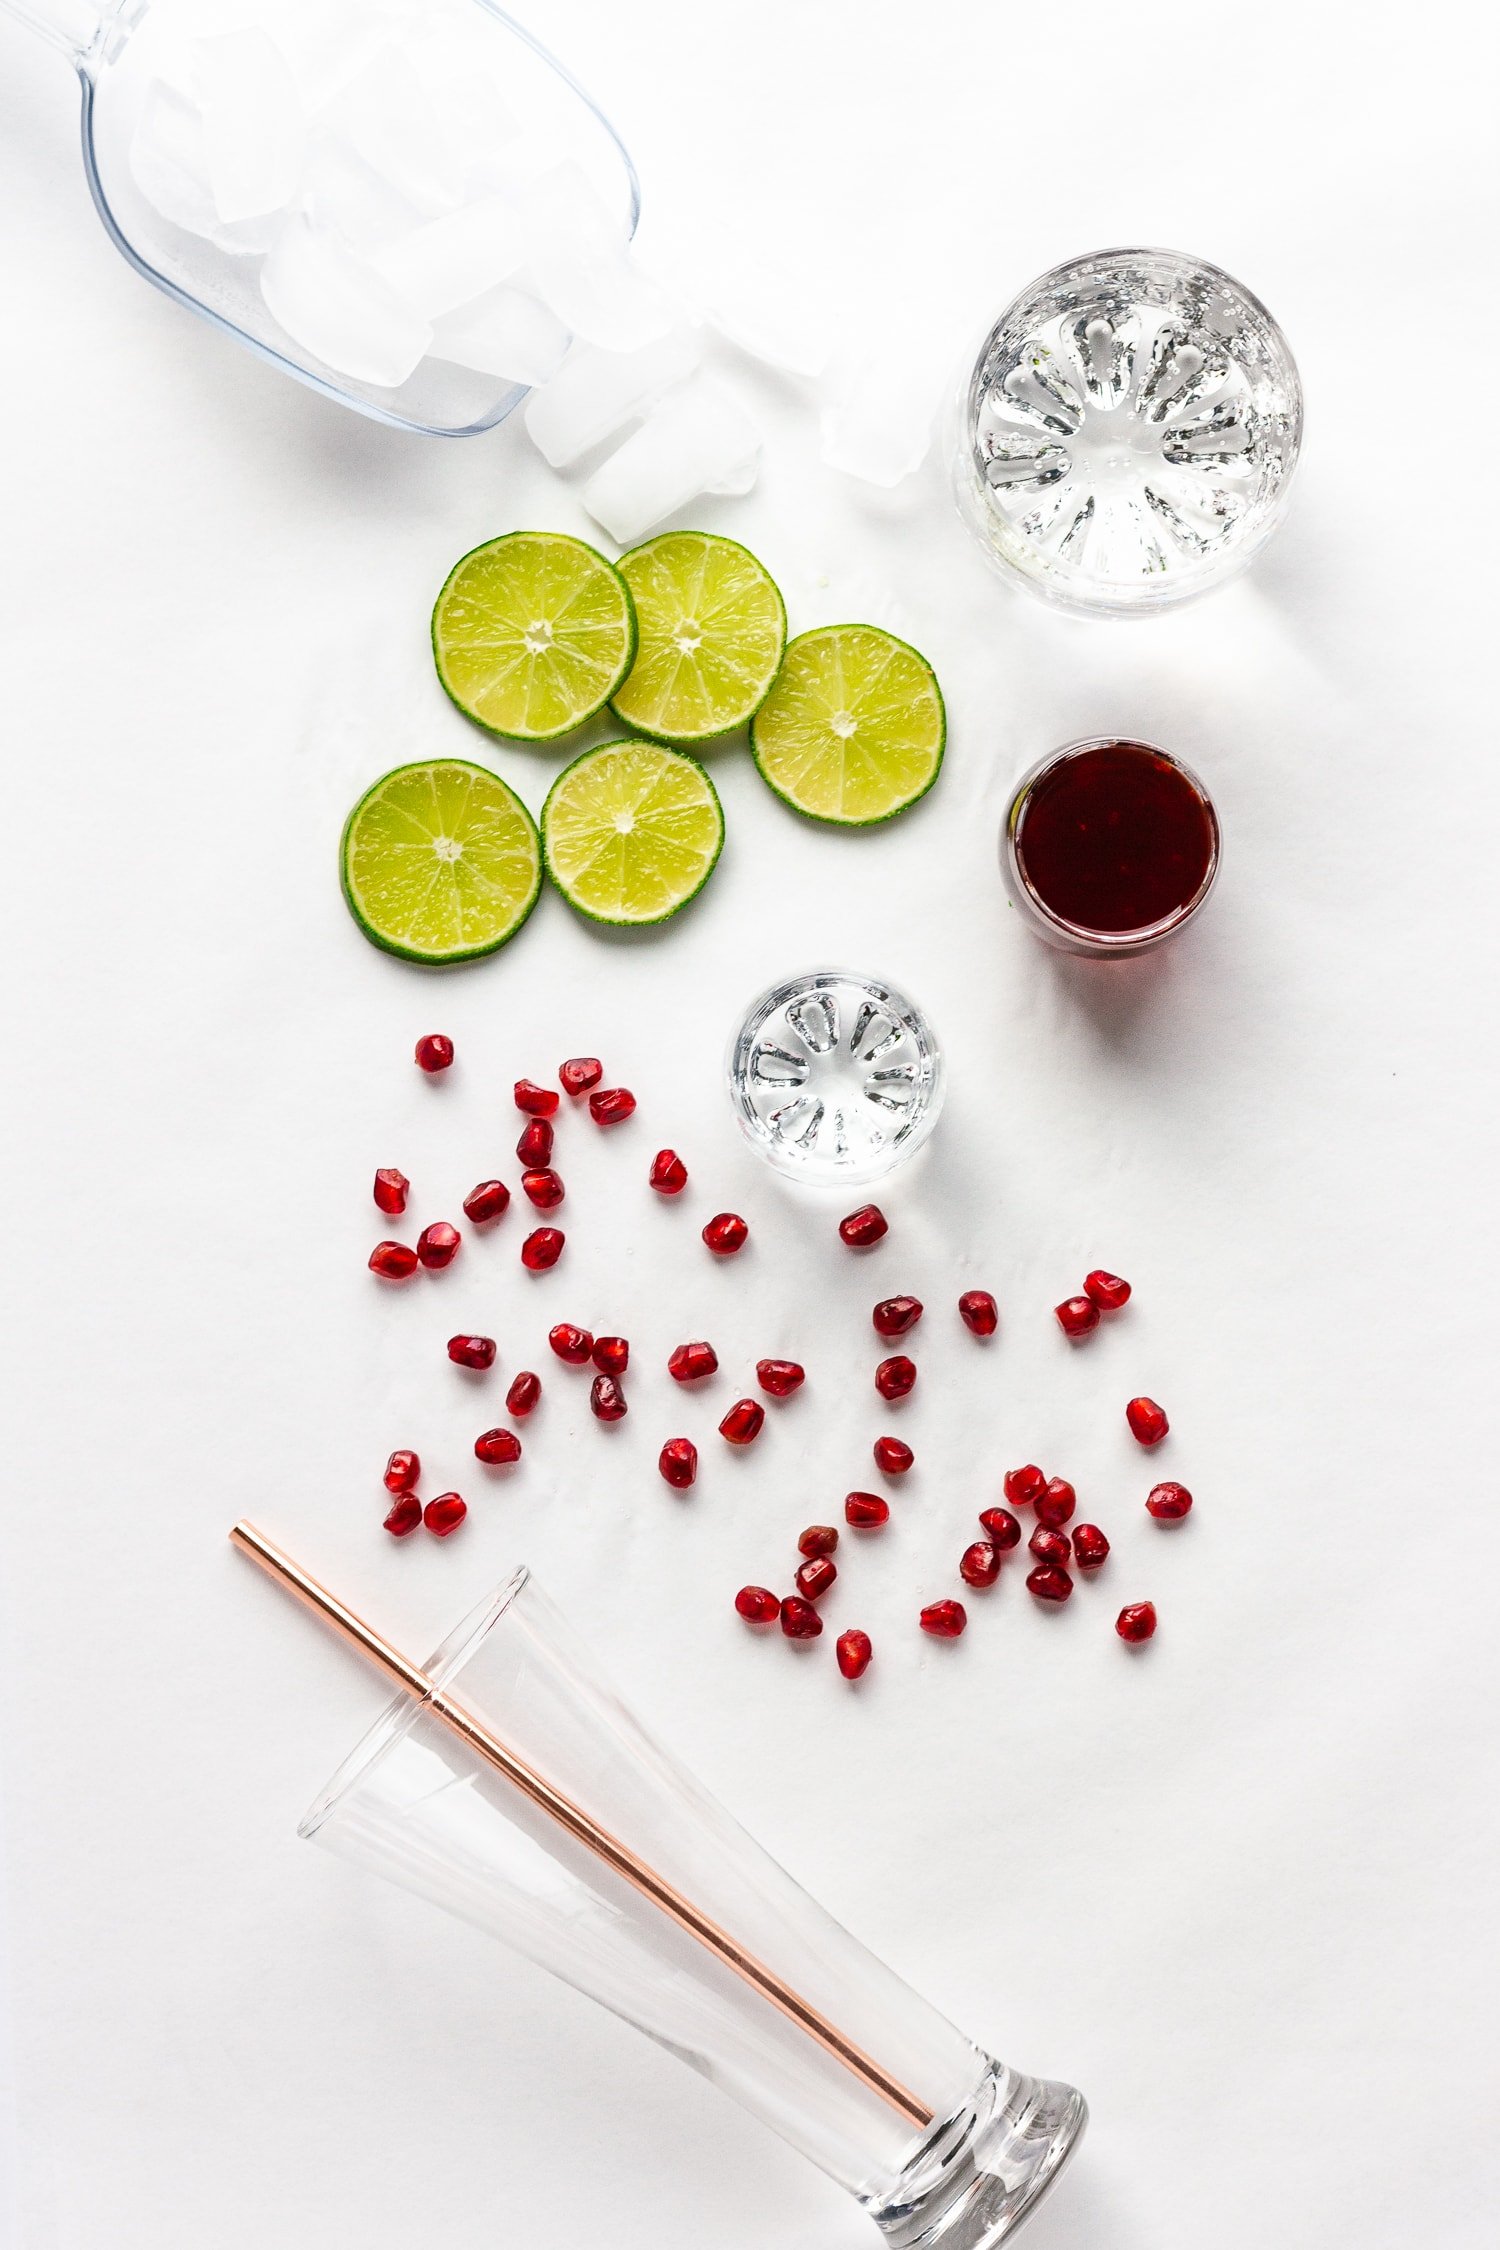 Overhead shot of all the ingredients needed to make the Pomegranate Lime Spritzer cocktail recipe